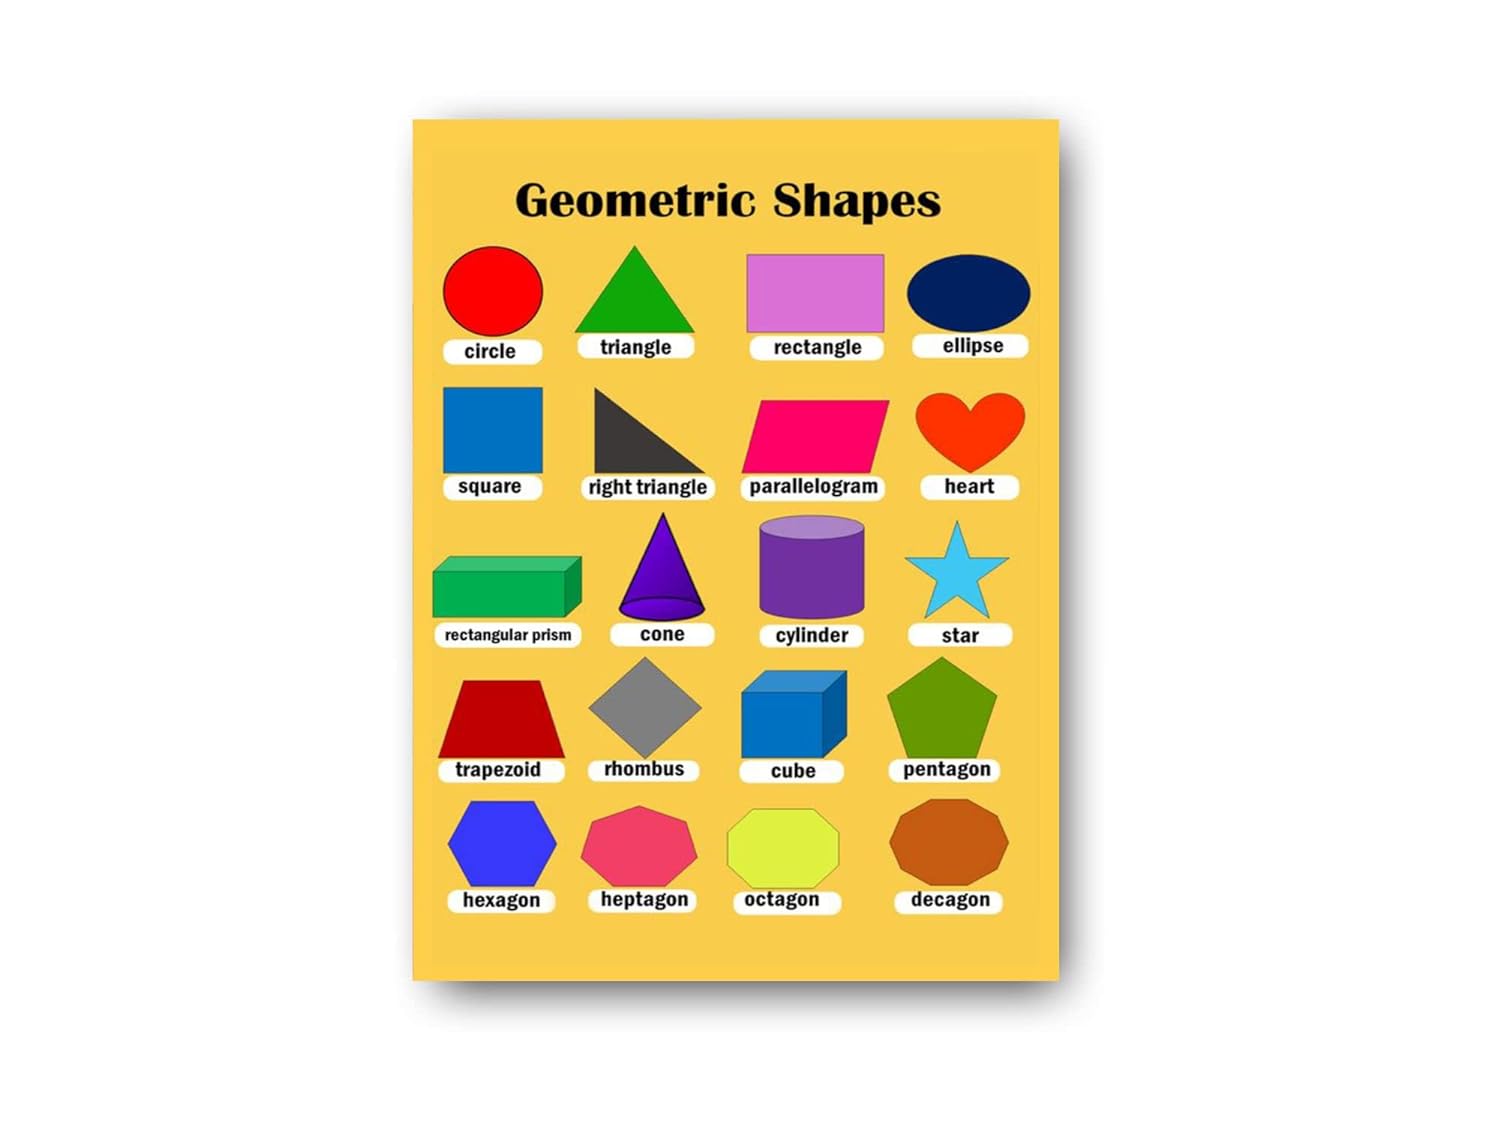 Educational geometric shapes poster for preschool learning activities